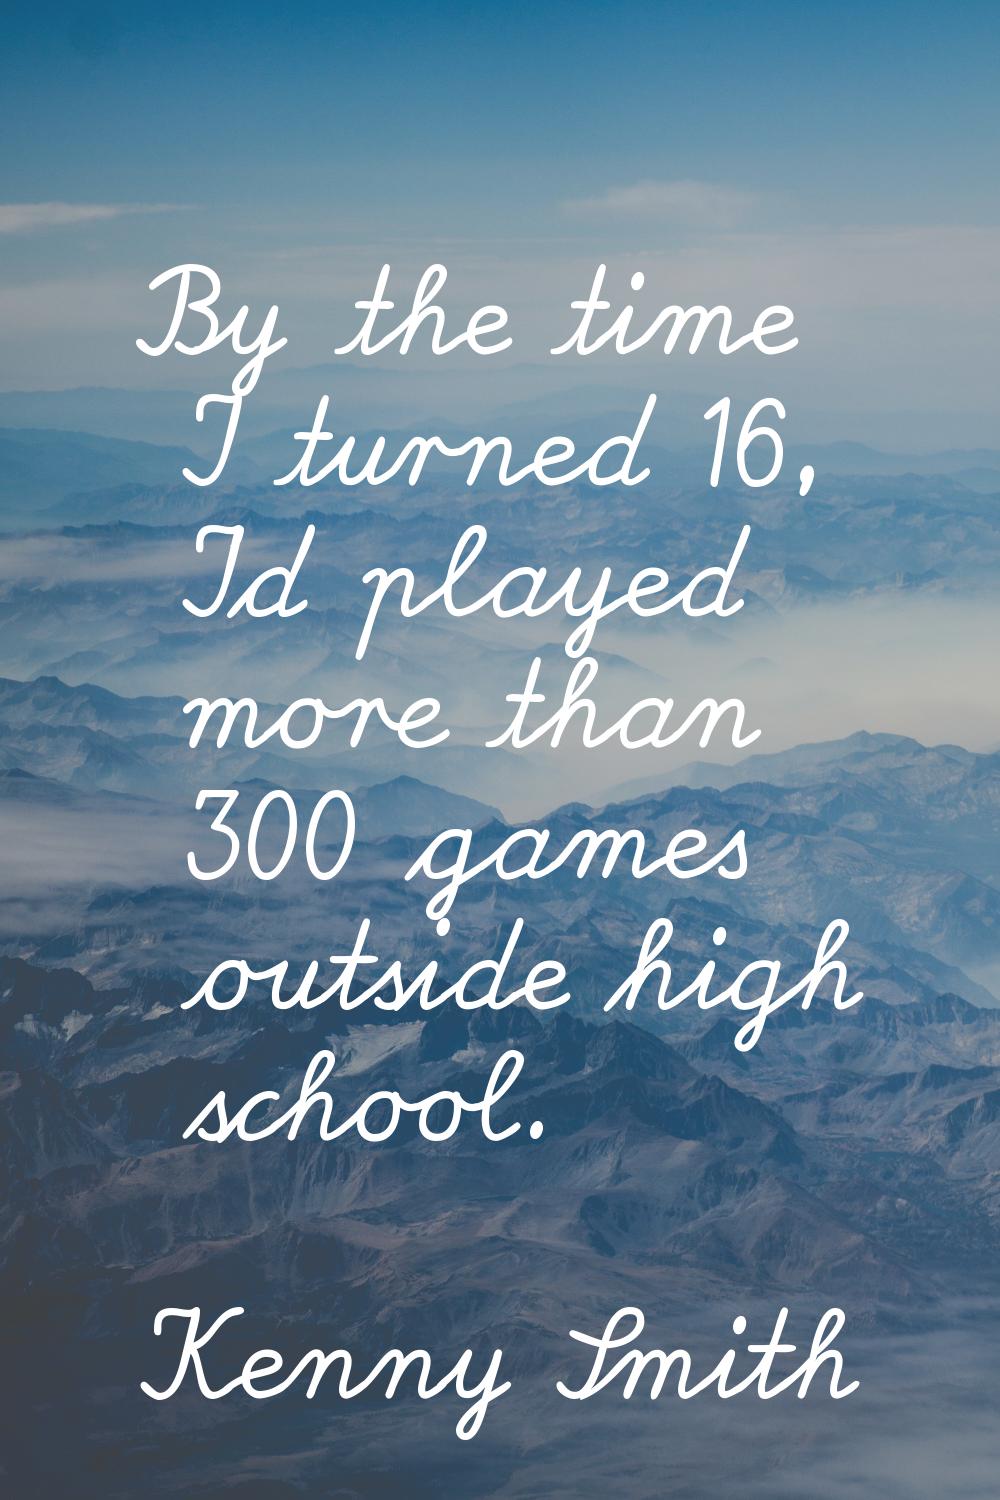 By the time I turned 16, I'd played more than 300 games outside high school.